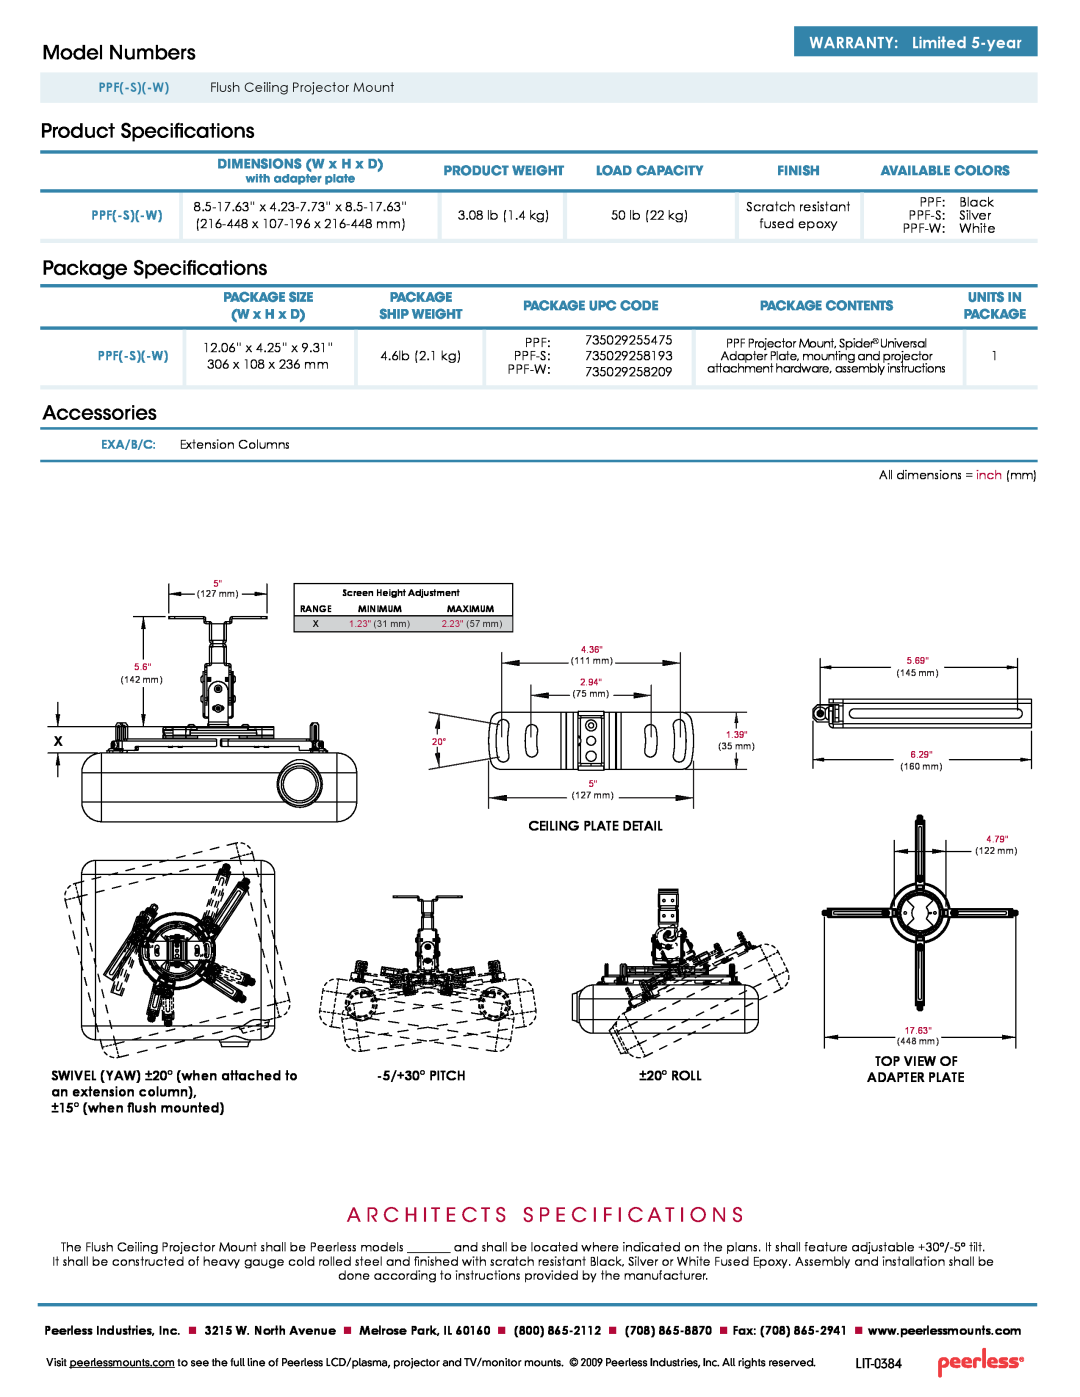 Peerless Industries PPF(-S)(-W) Model Numbers, Product Specifications, Package Specifications, Accessories, 5/+30 pItCH 